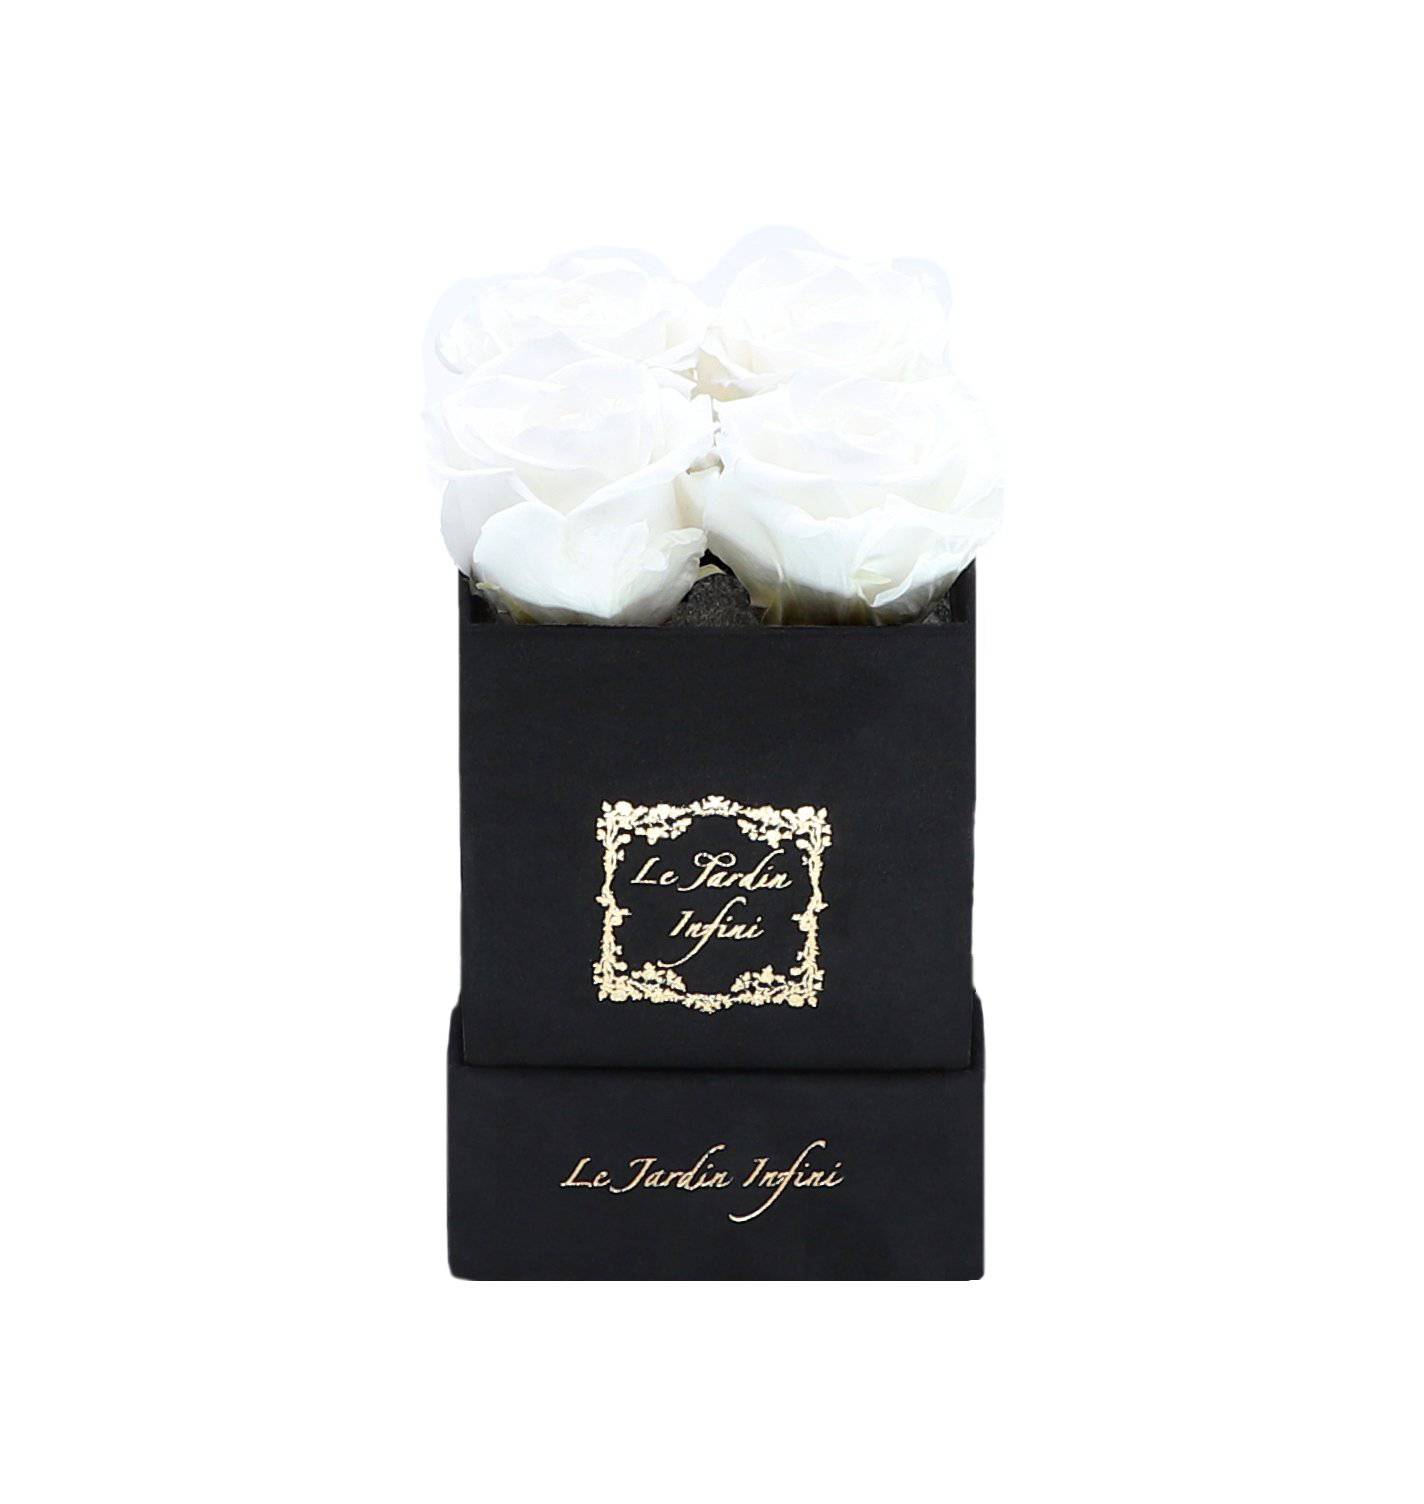 White Preserved Roses - Small Square Black Suede Box - Le Jardin Infini Roses in a Box